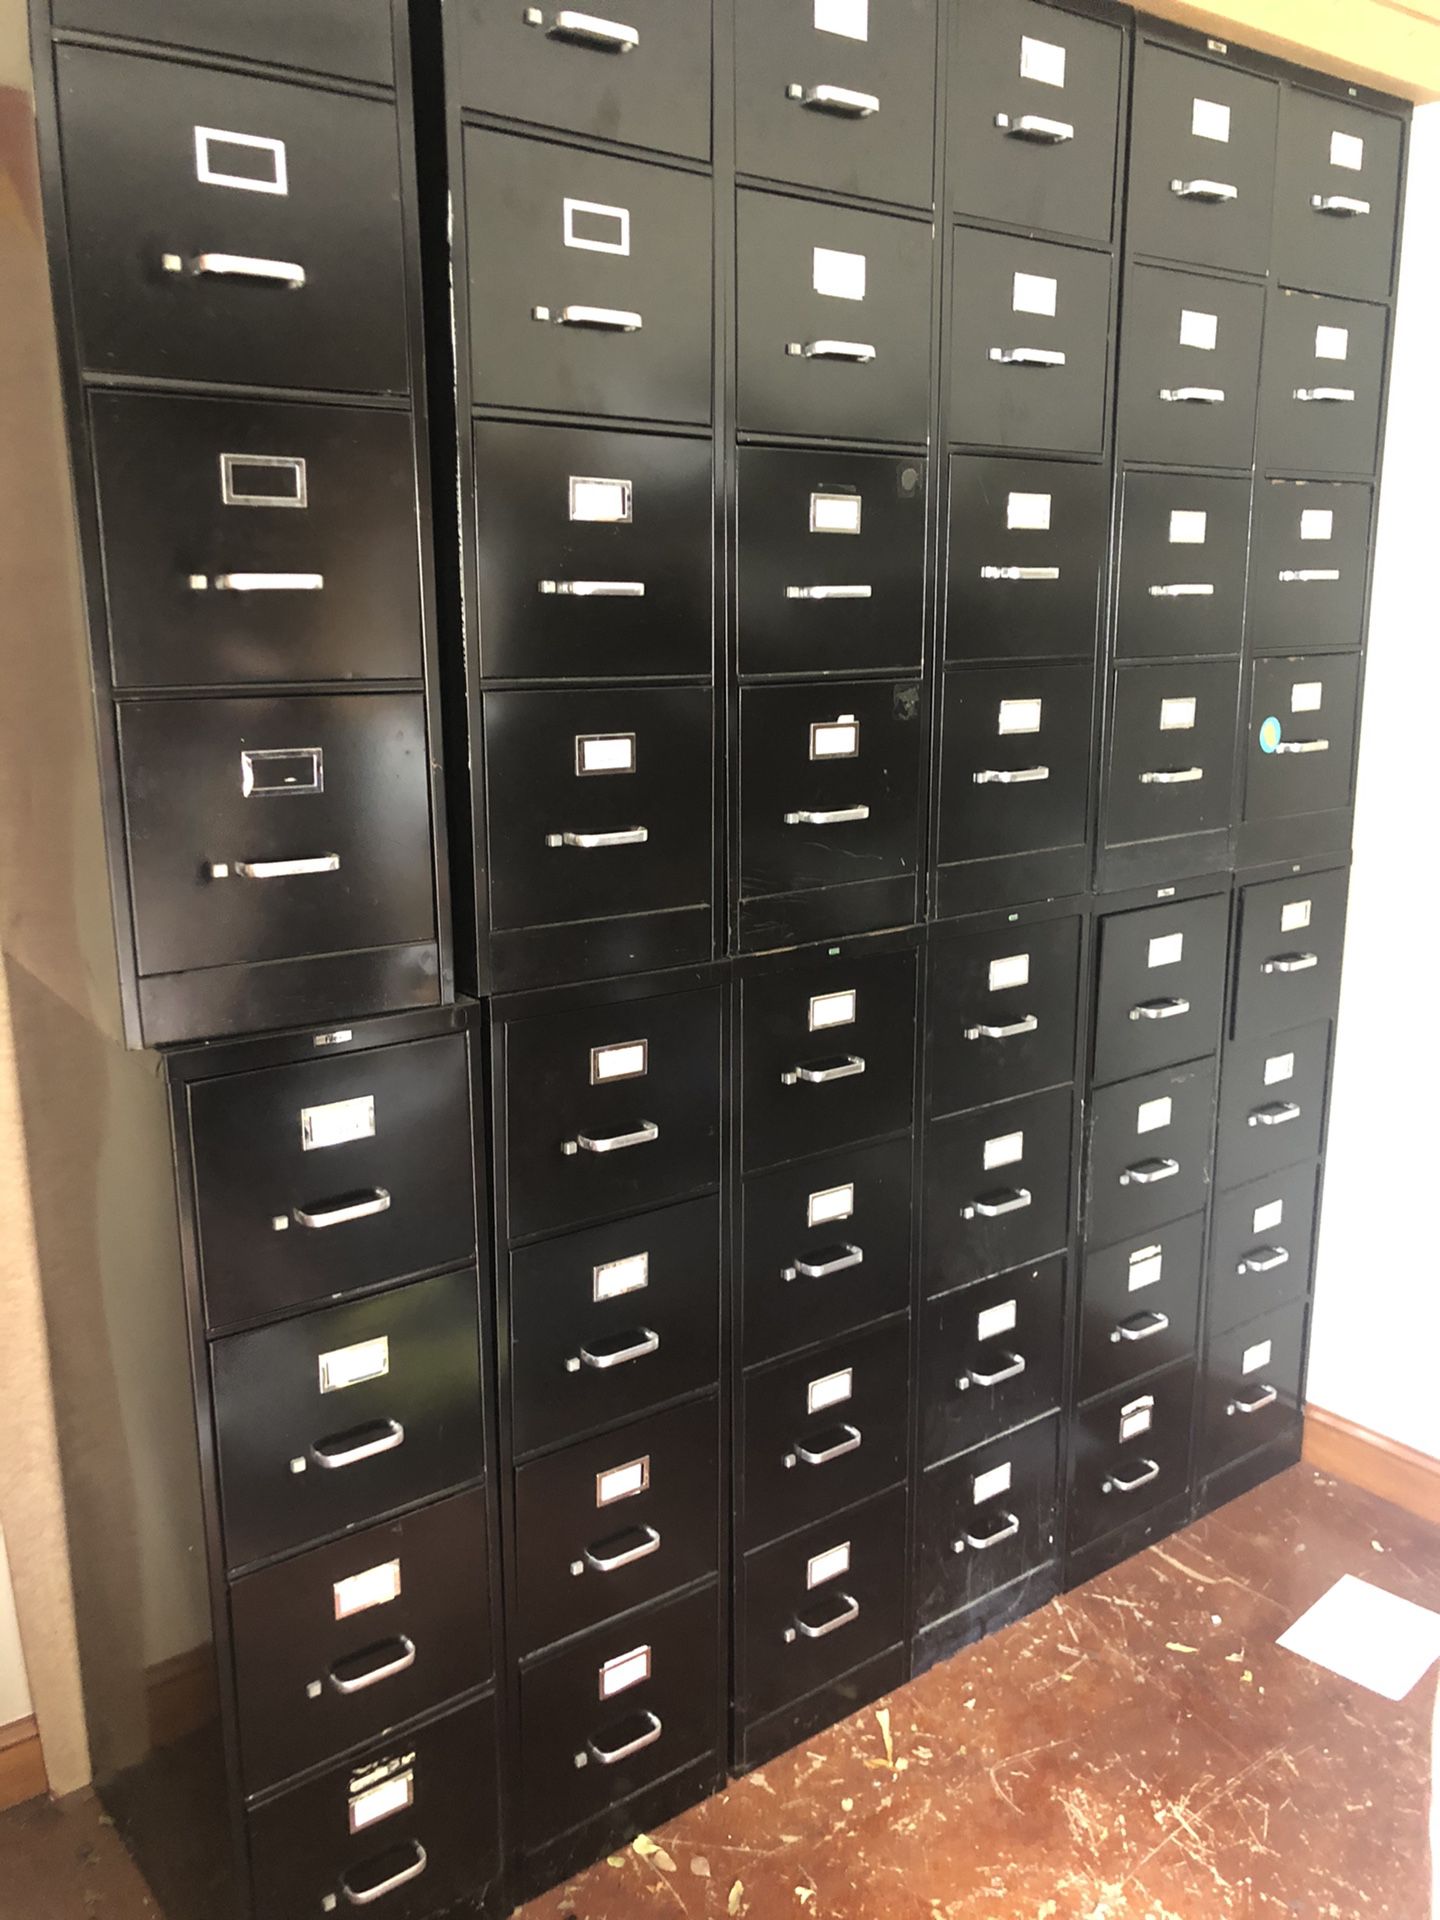 (12) FILEX 4 DRAWER FILE CABINET WITH HANGING FILES